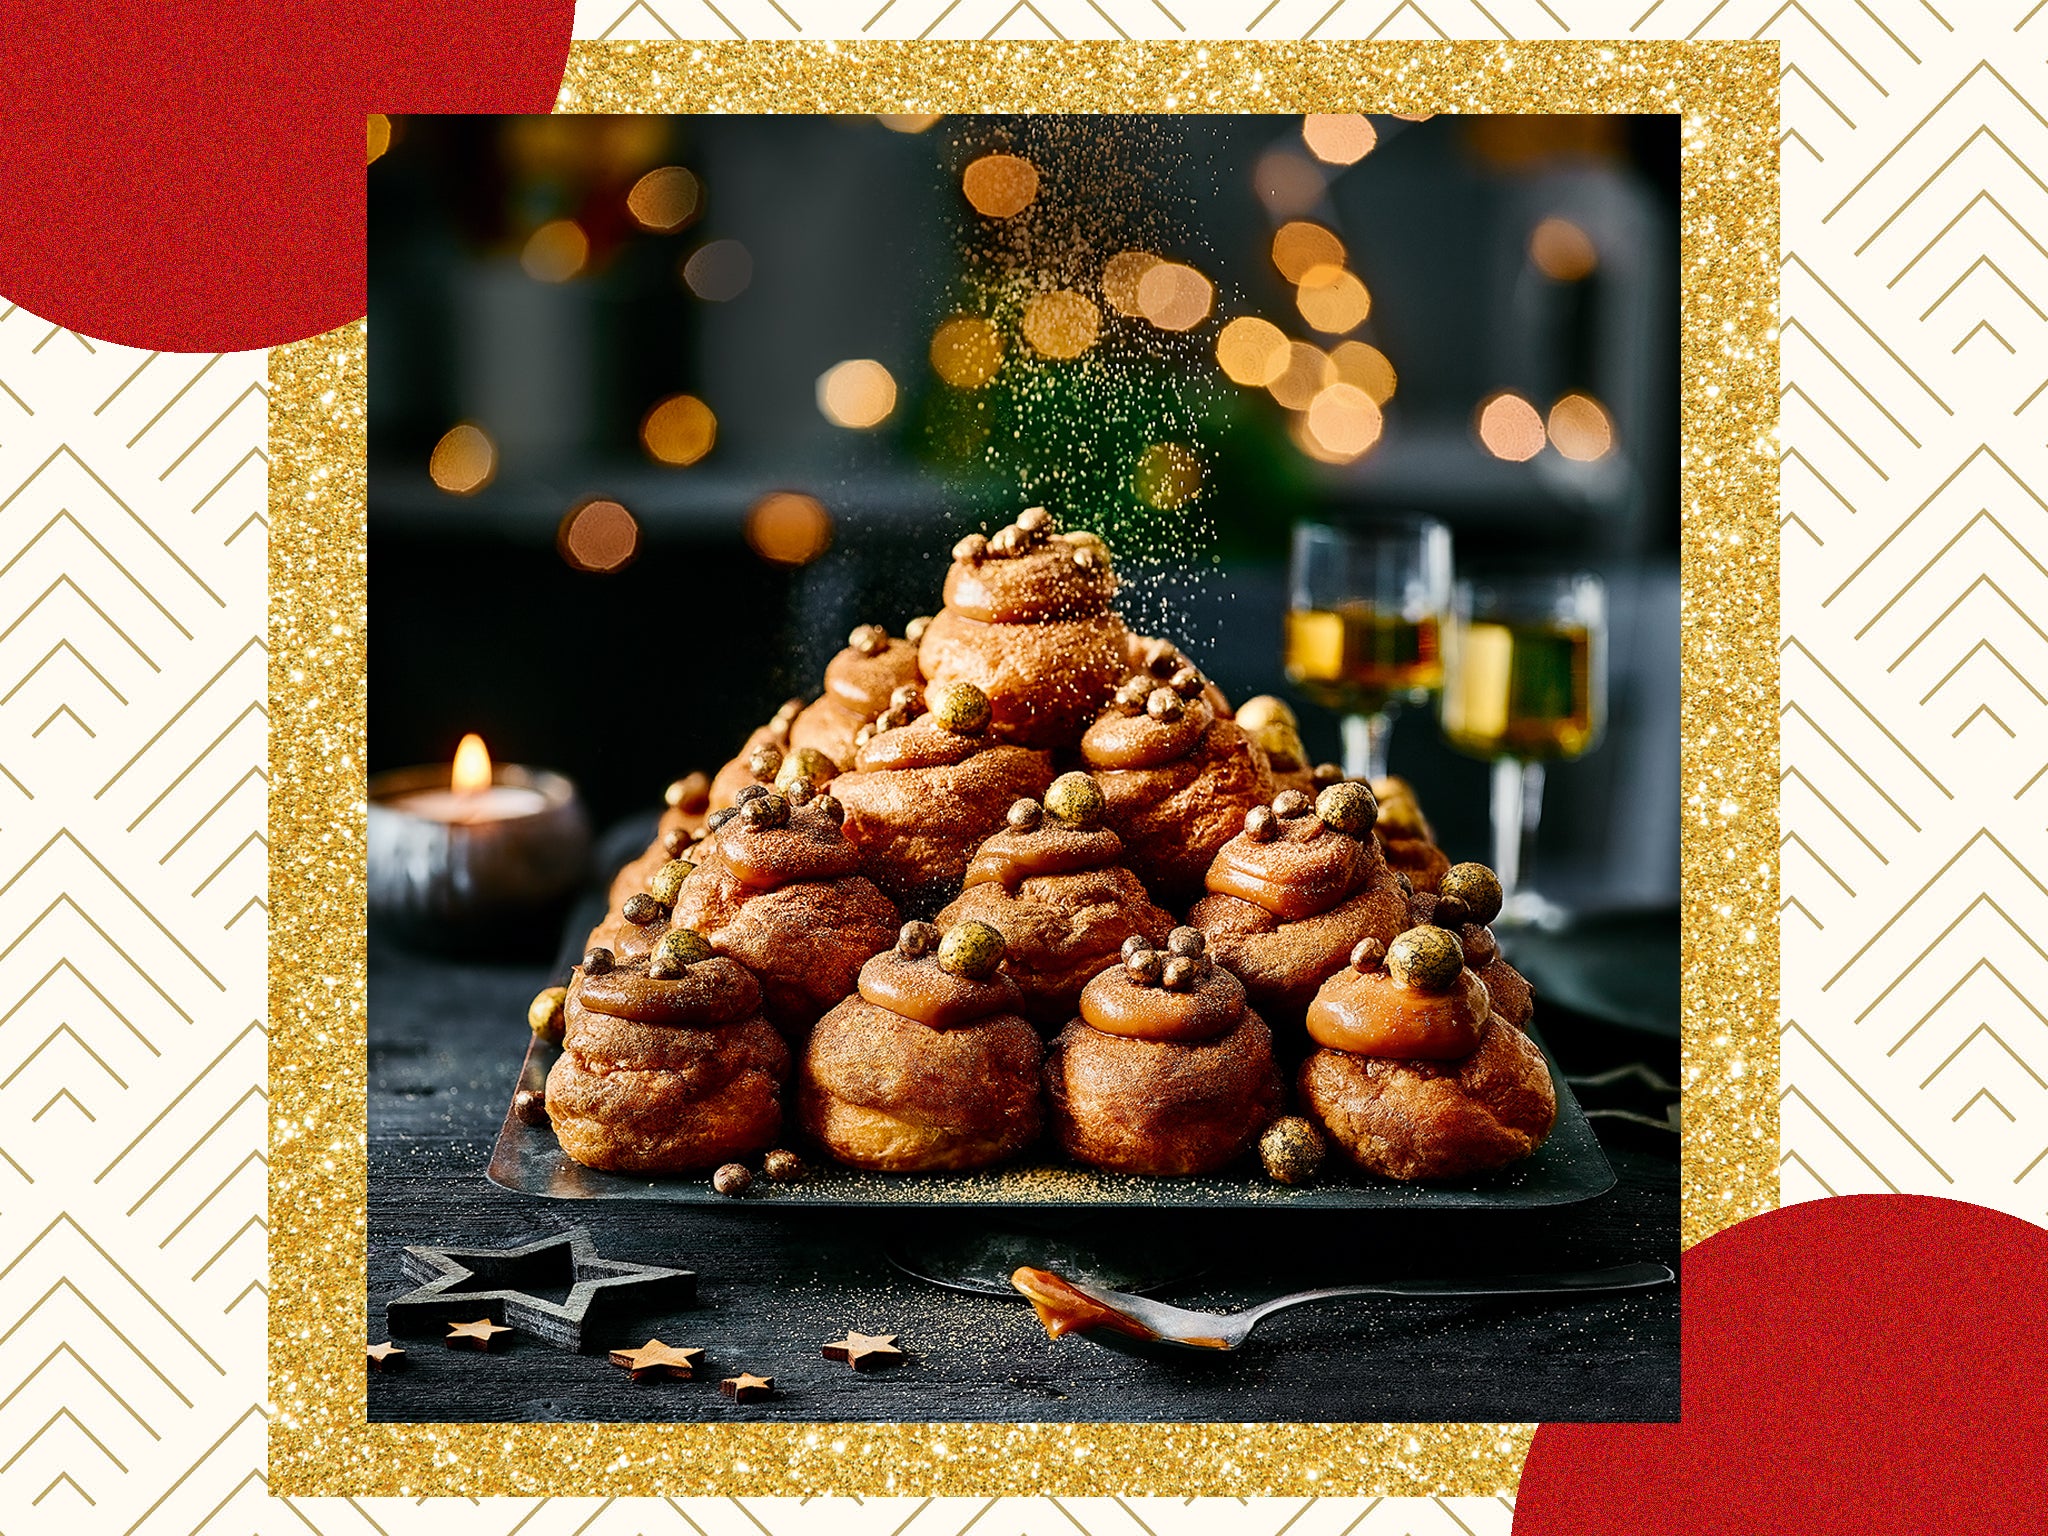 There’s always room for a much-loved profiterole